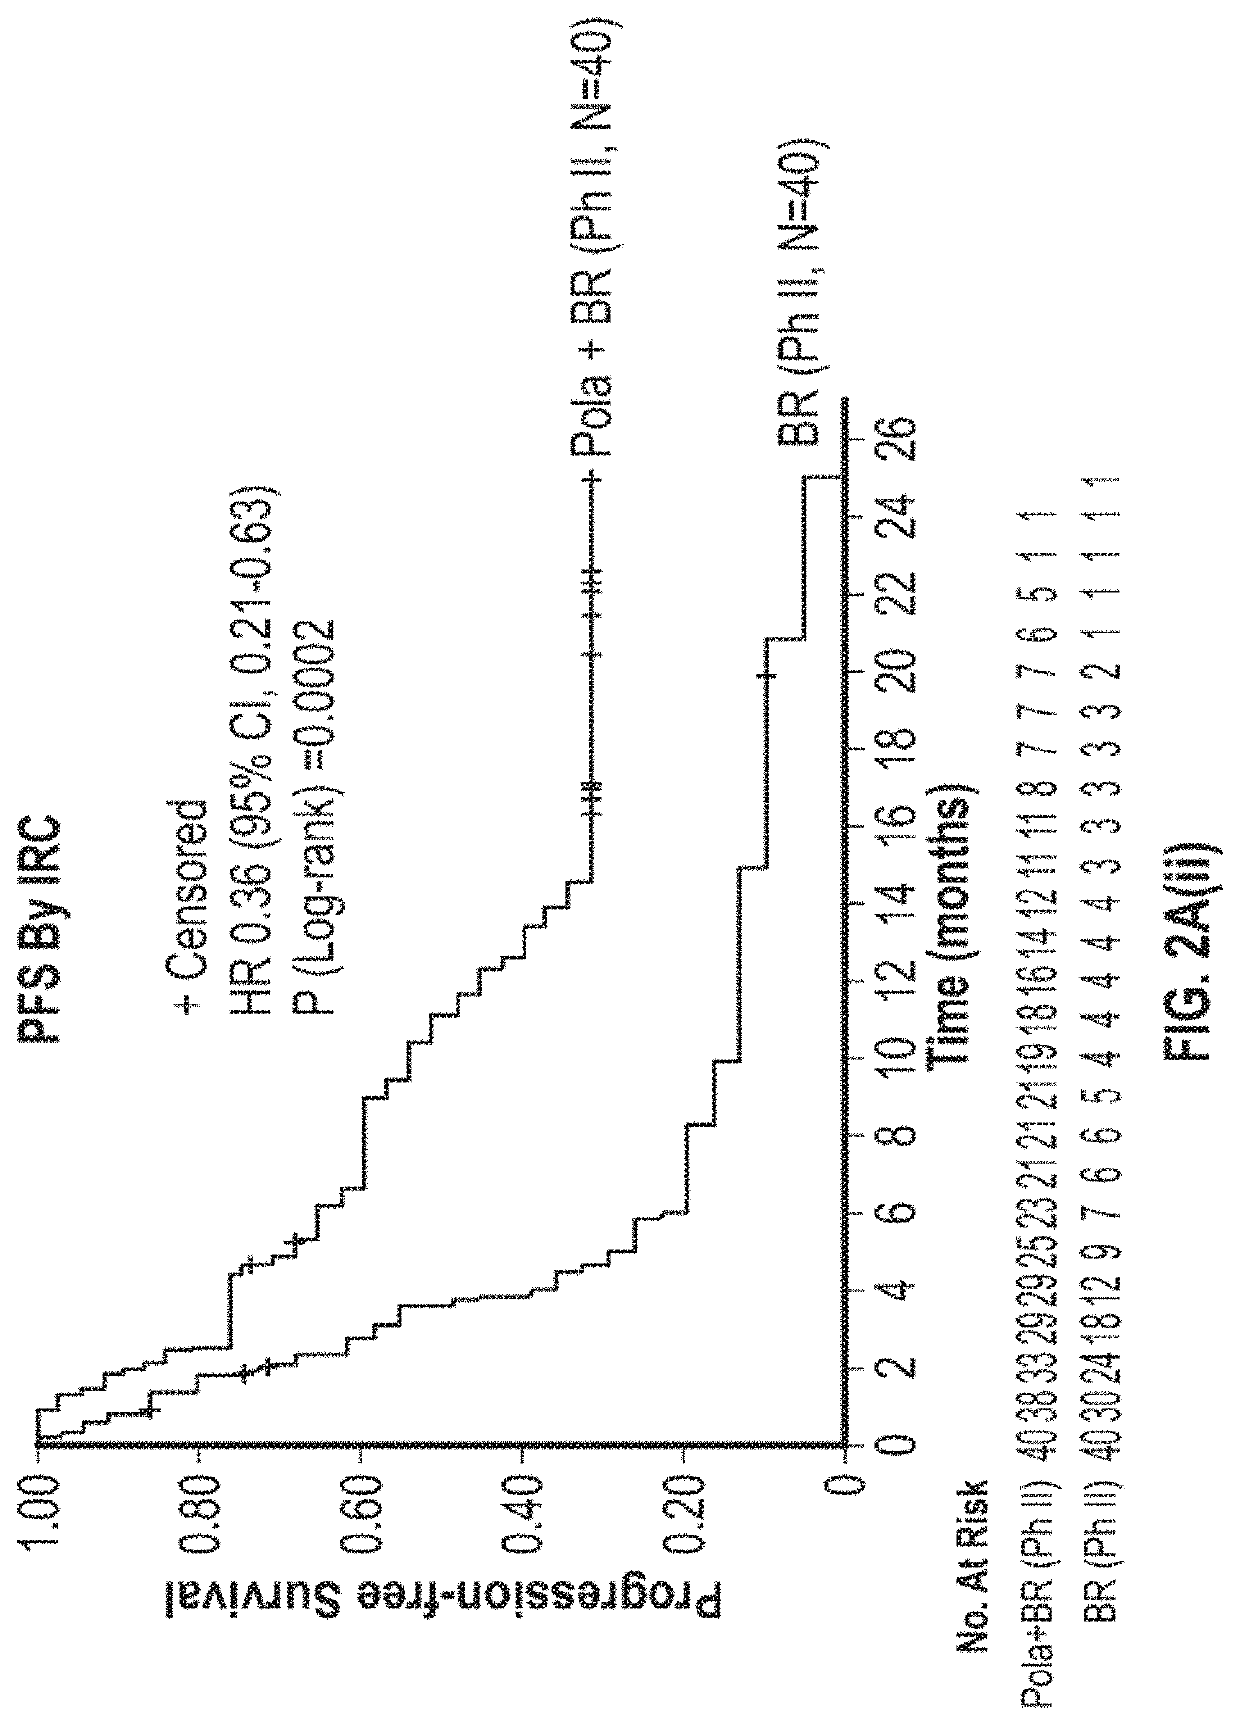 Combination therapy of diffuse large b-cell lymphoma comprising an Anti-cd79b immunoconjugates, an alkylating agent and an Anti-cd20 antibody